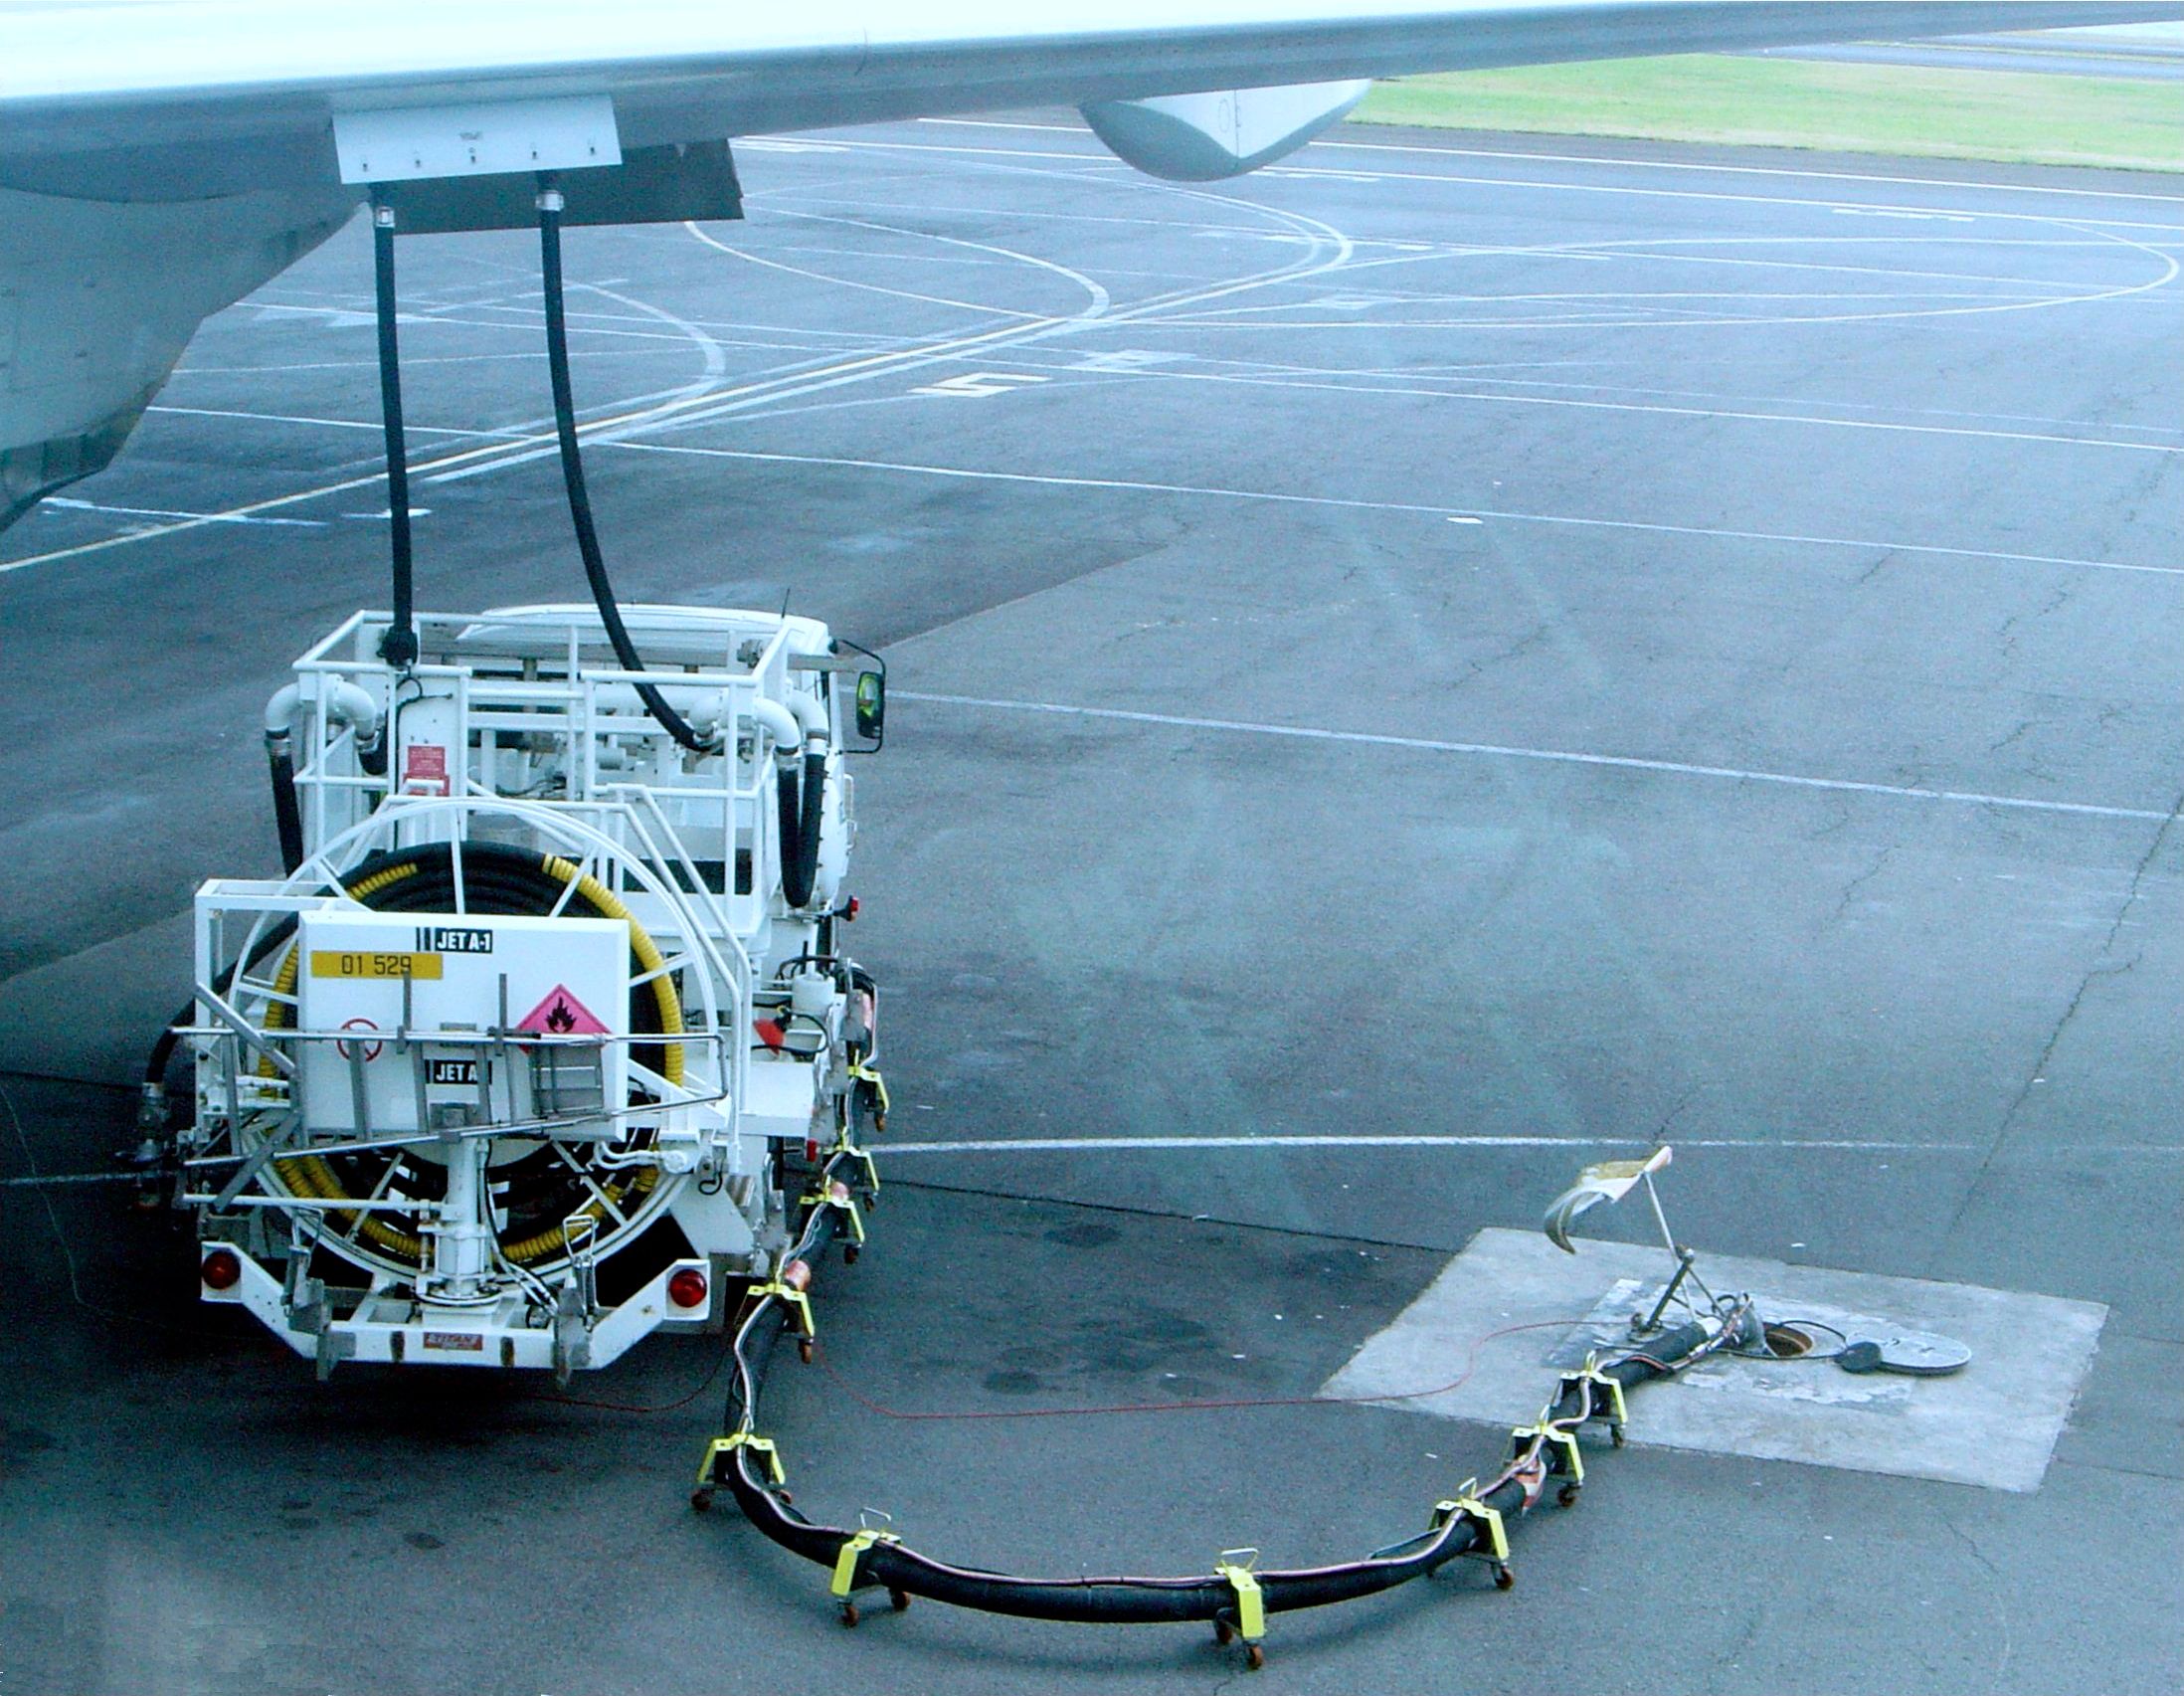 A refueling truck parked beneath an aircraft wing.